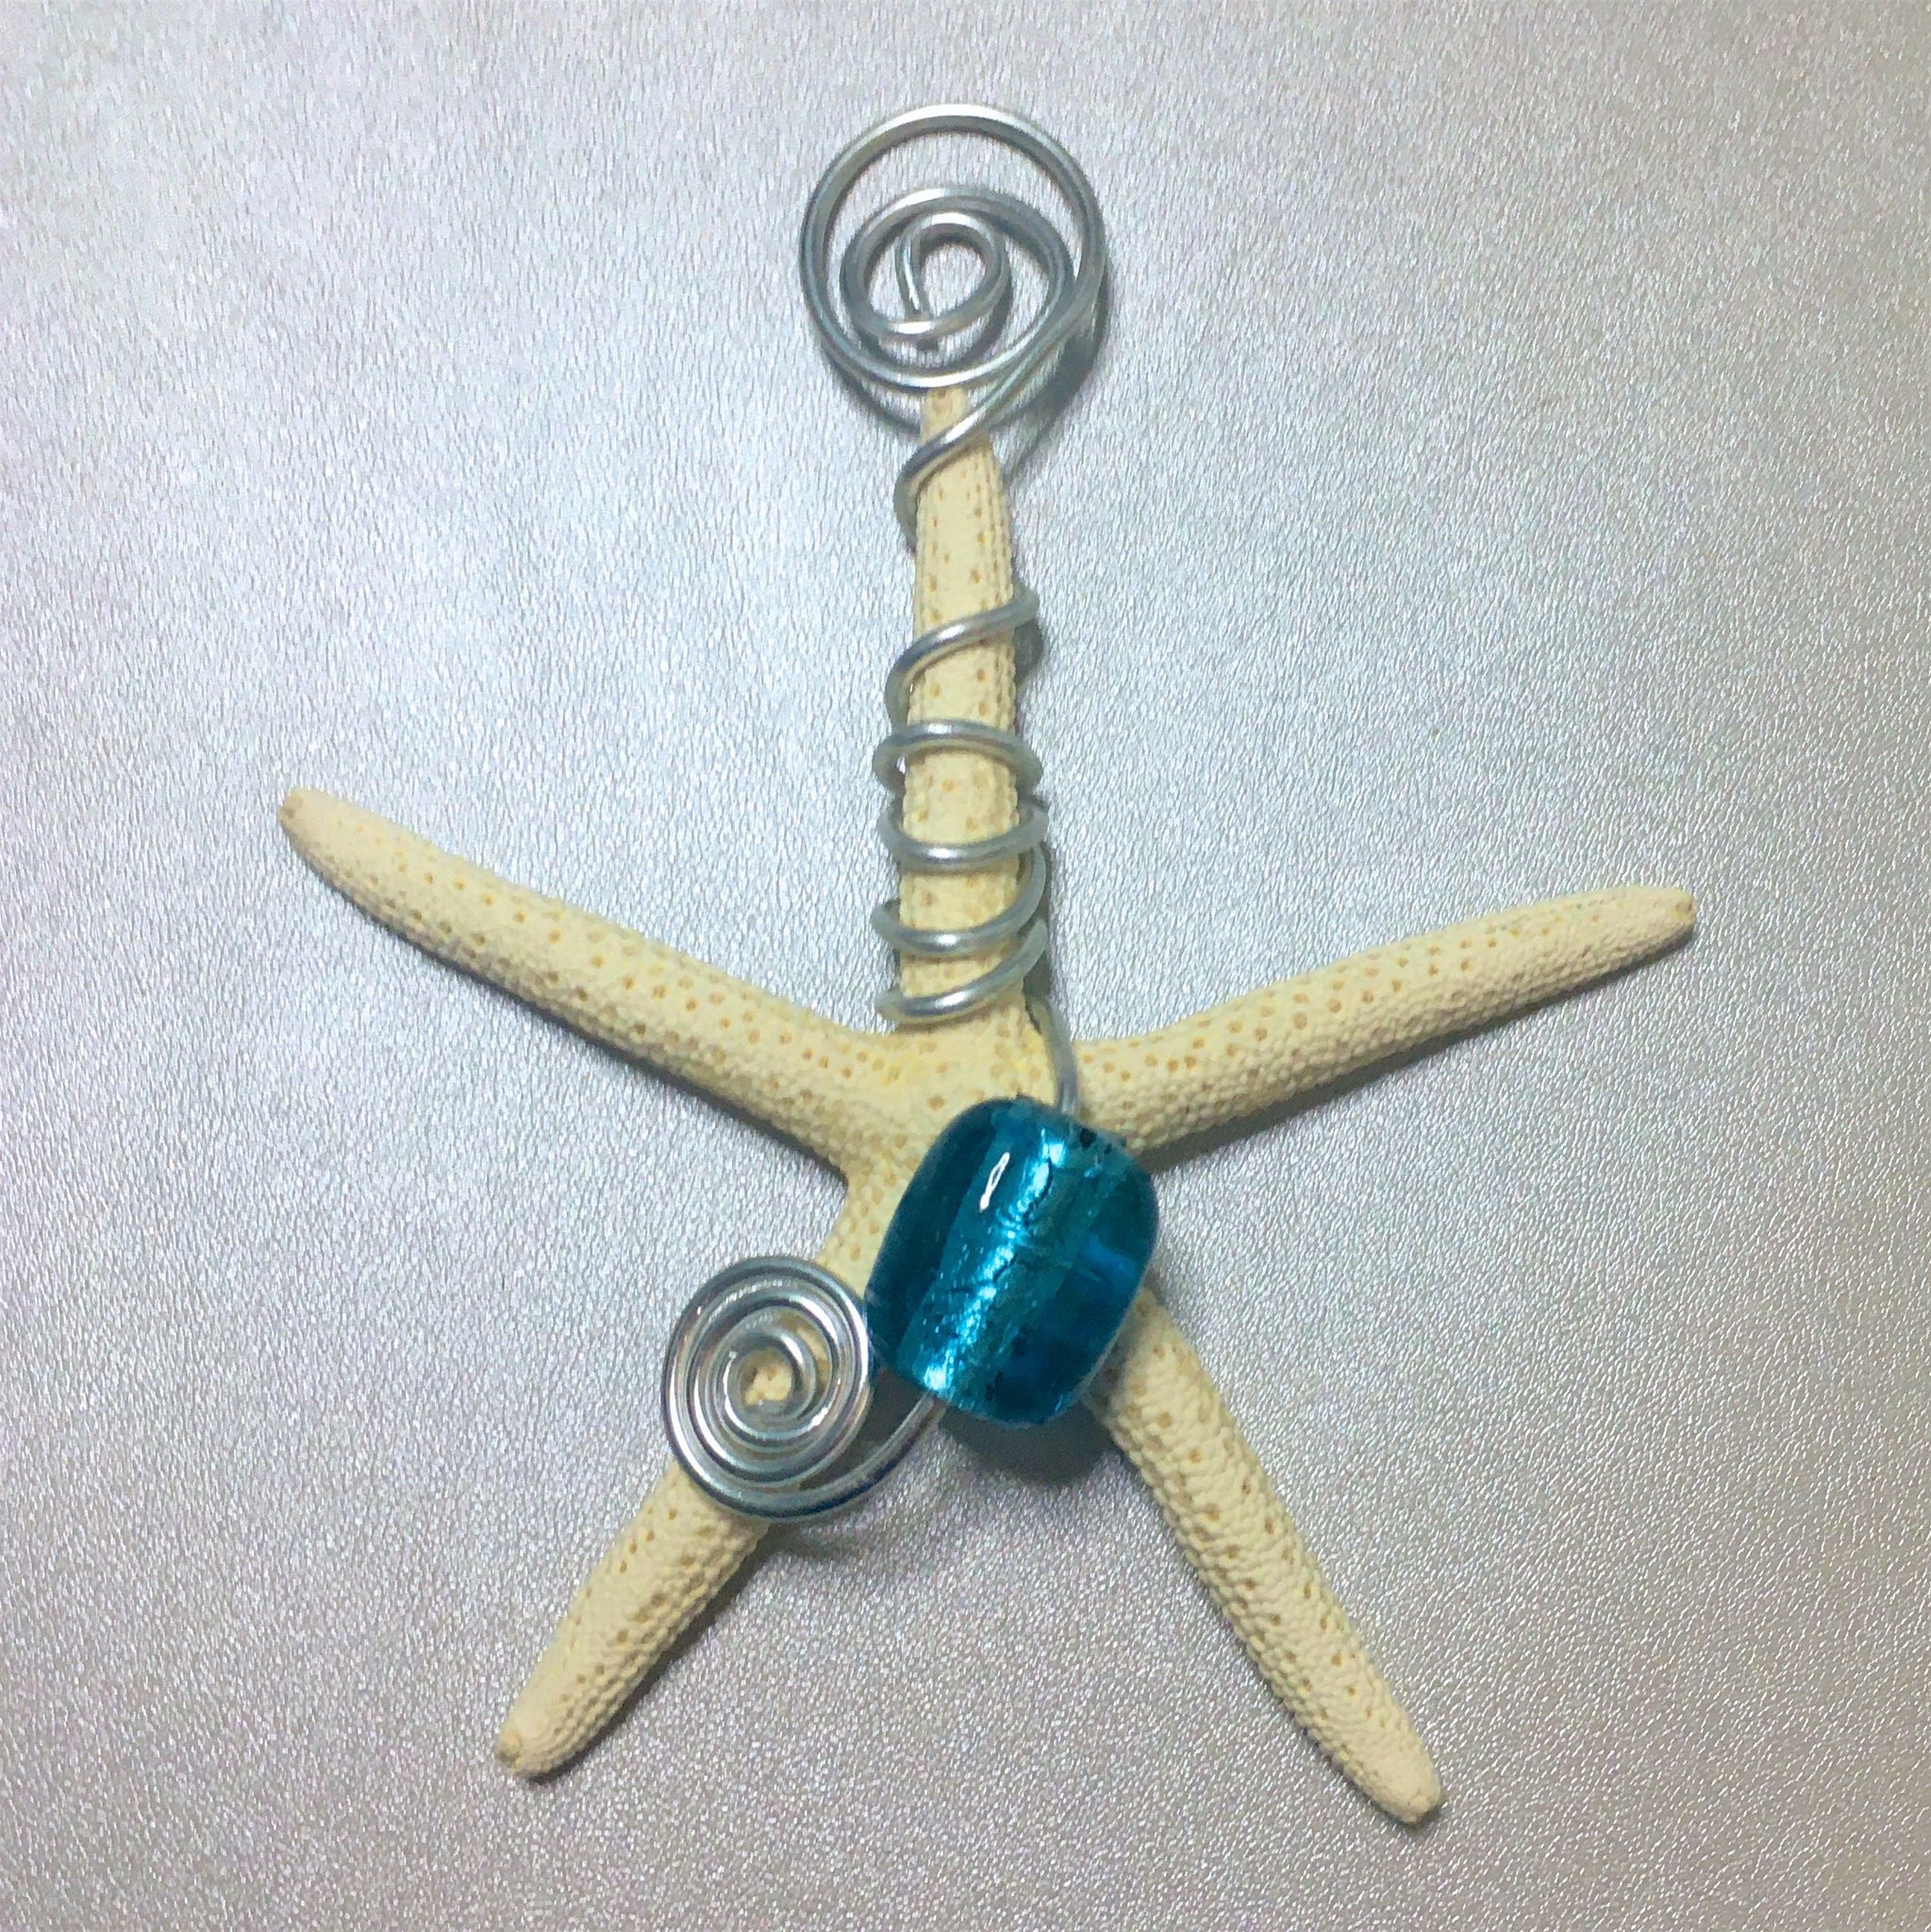 Starfish Ornament #6 - handmade, wire wrapped